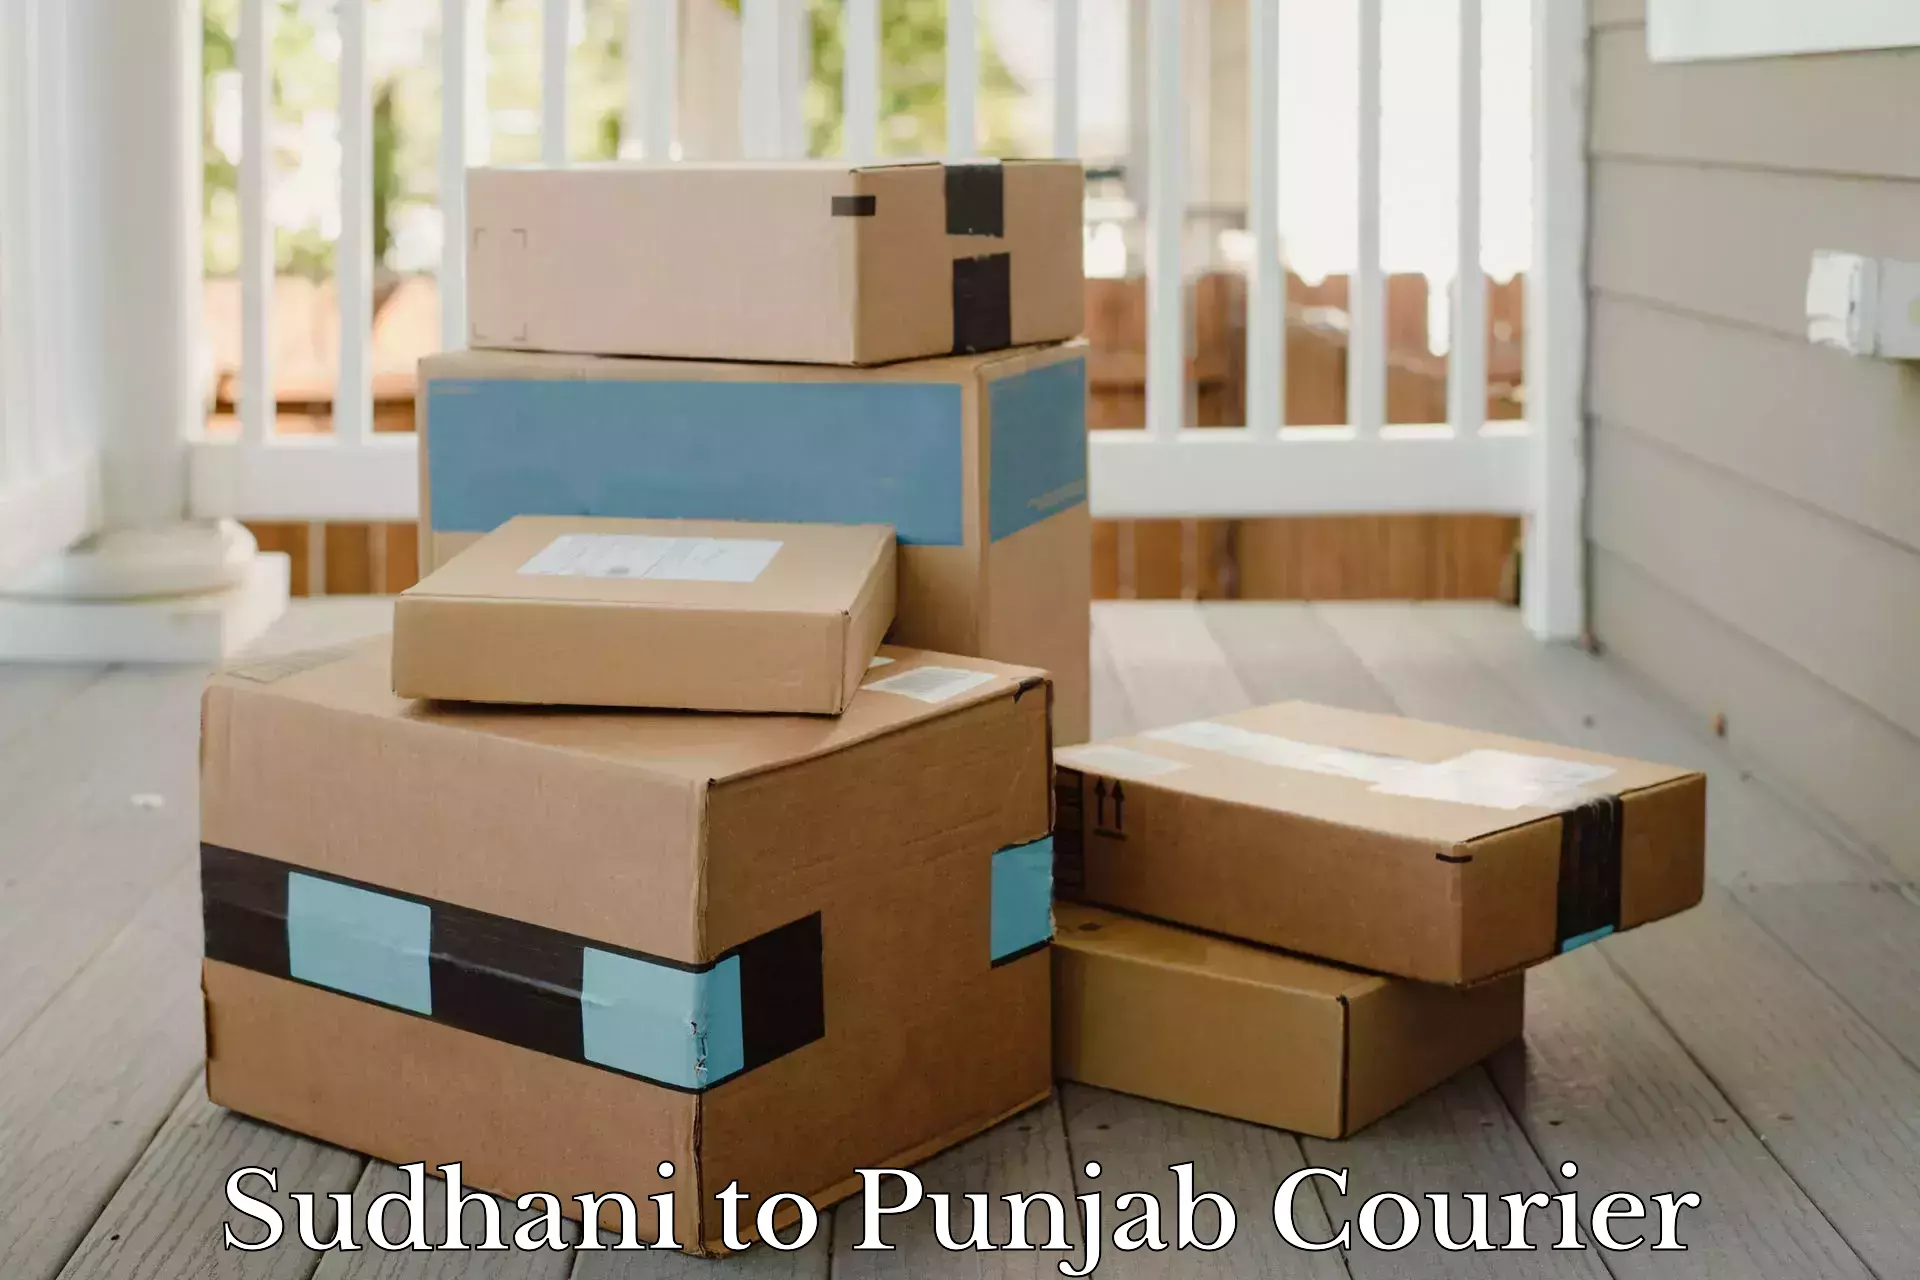 Courier rate comparison Sudhani to Central University of Punjab Bathinda